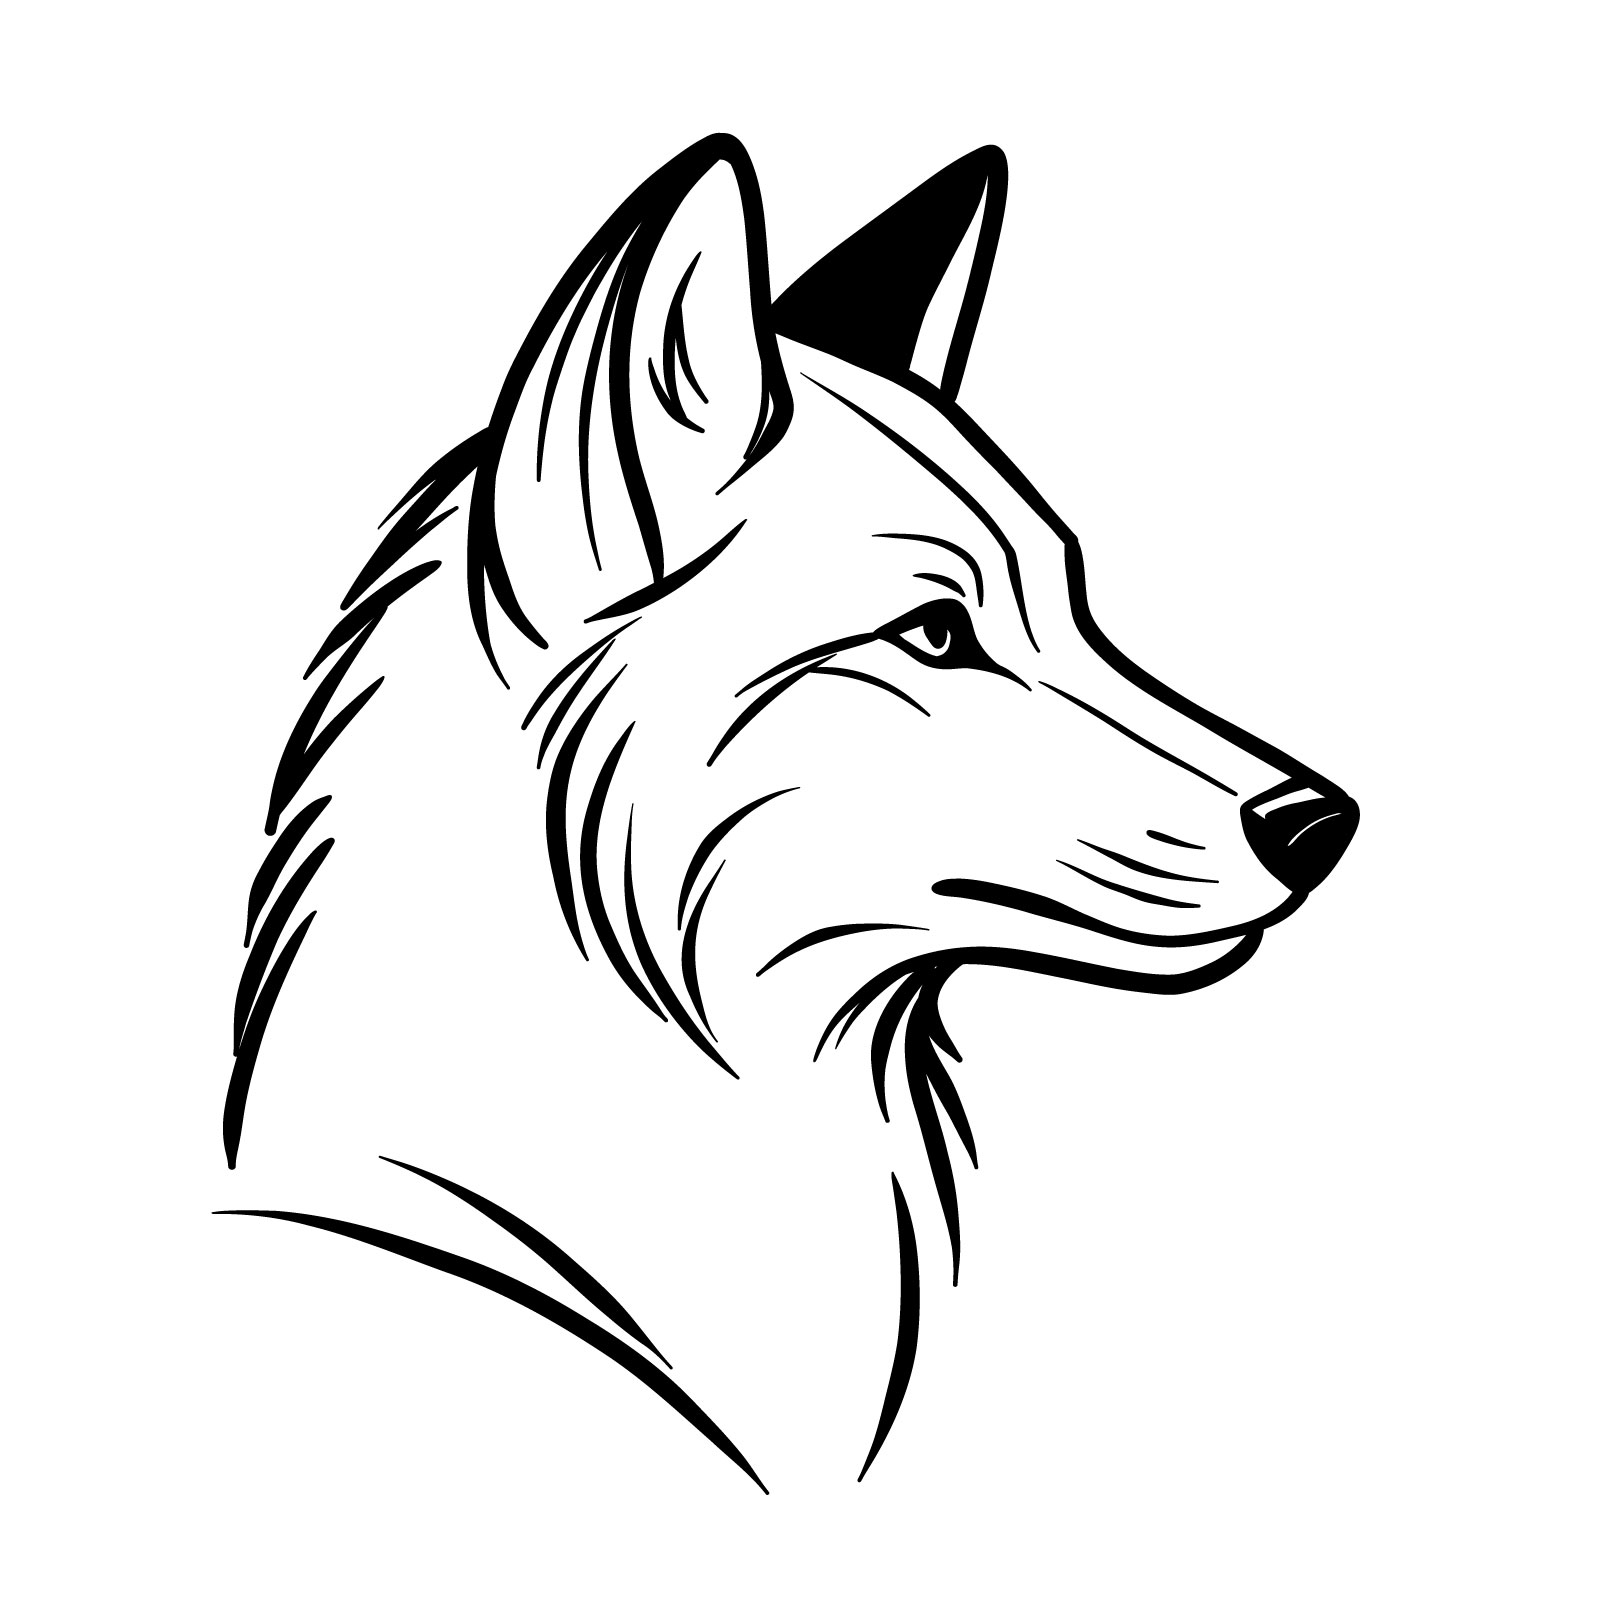 How to draw a wolf's head side view - step-by-step guide